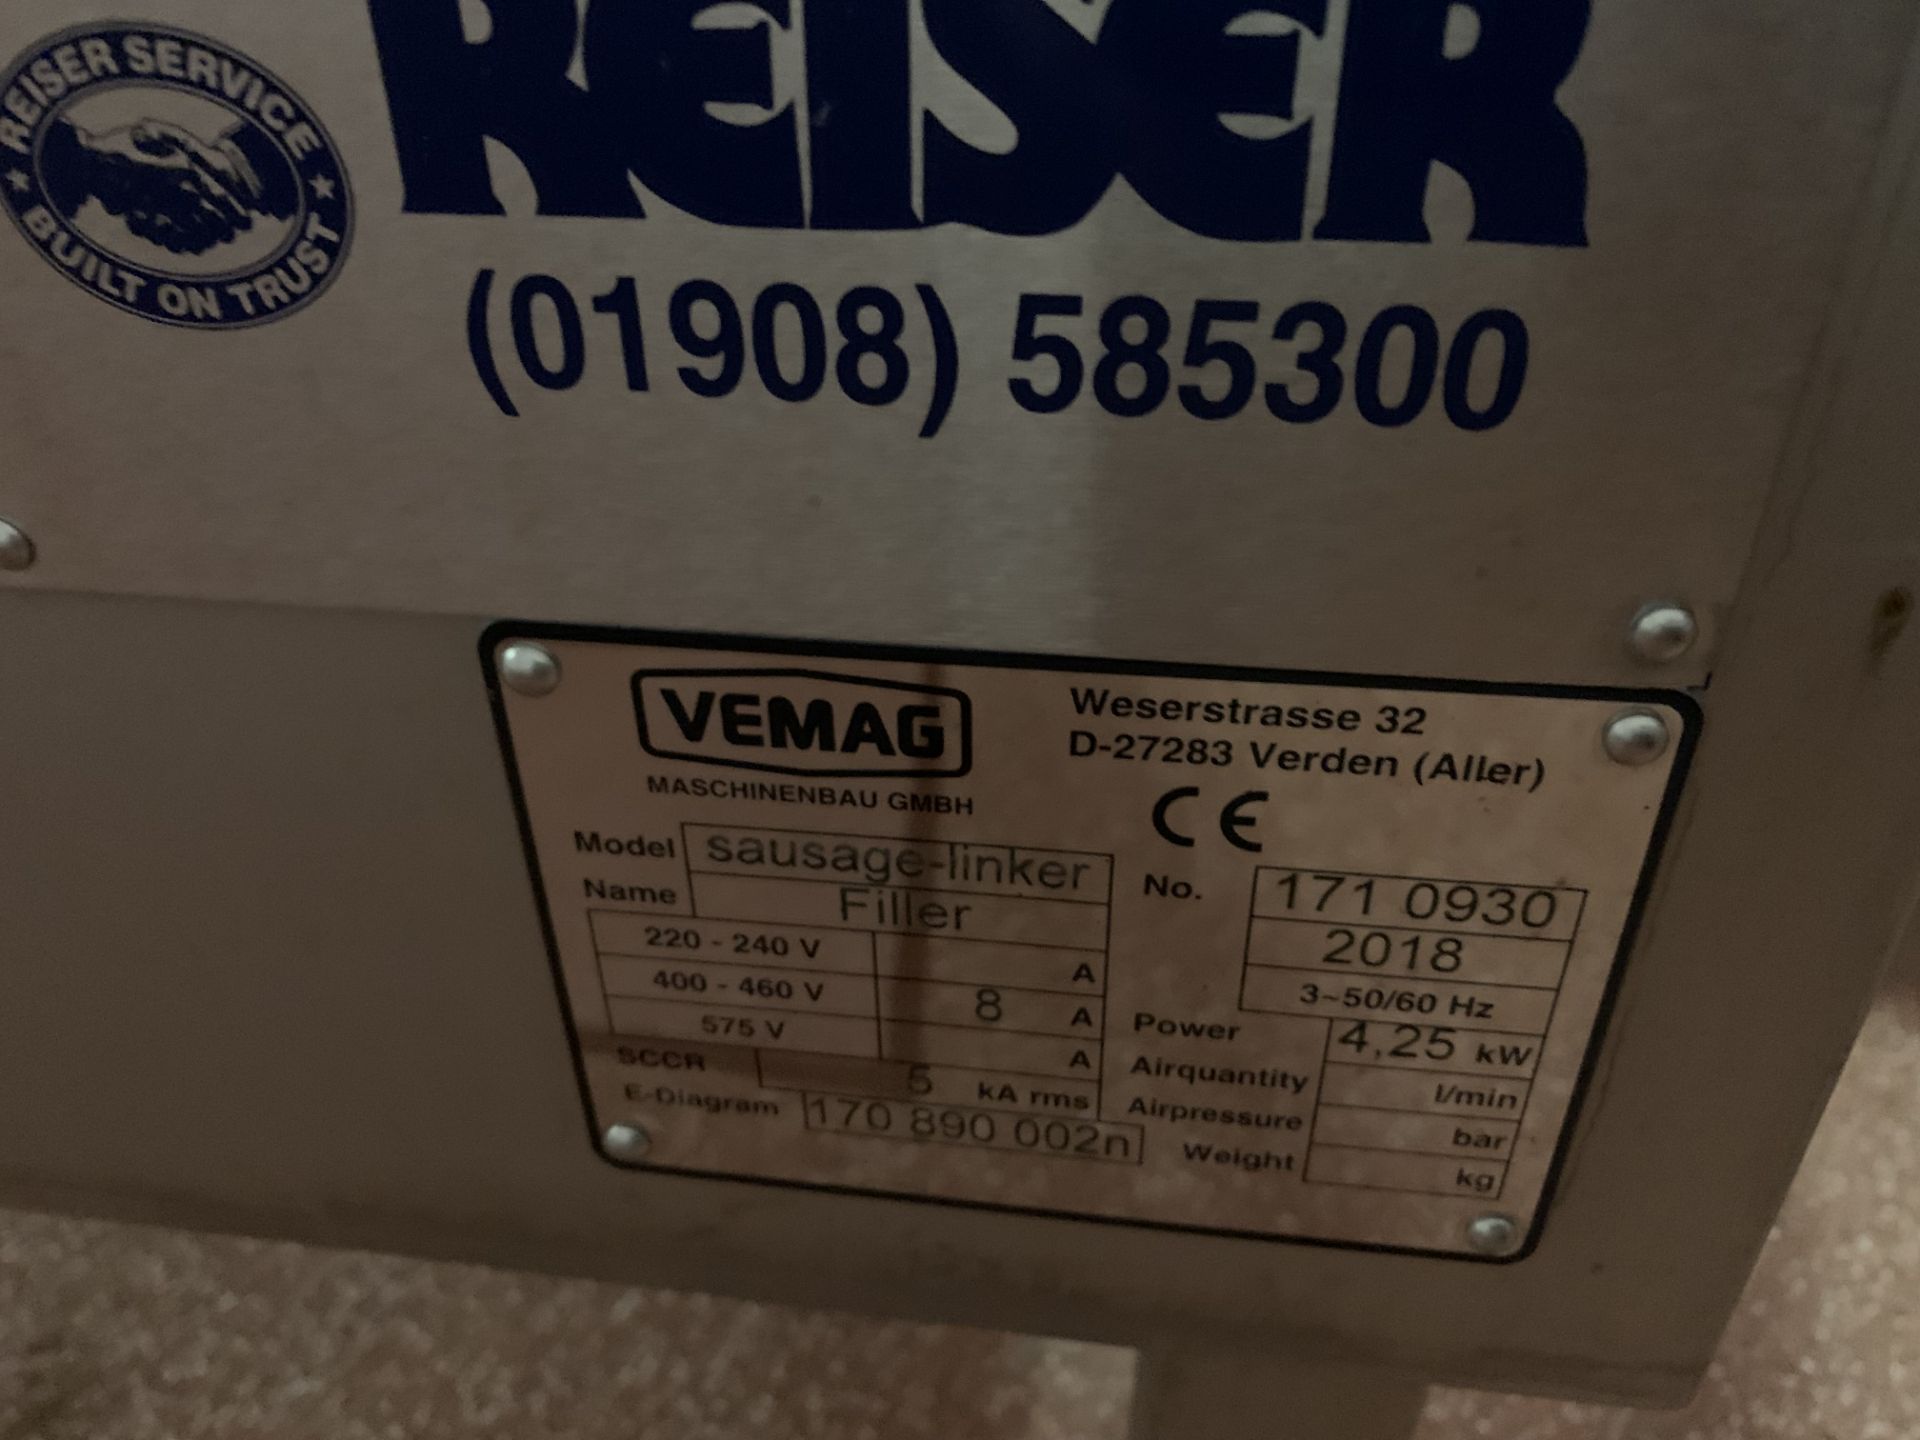 Vemag Lucky Sausage Linker, Serial Number: 171-0930 (2018) - Image 4 of 7